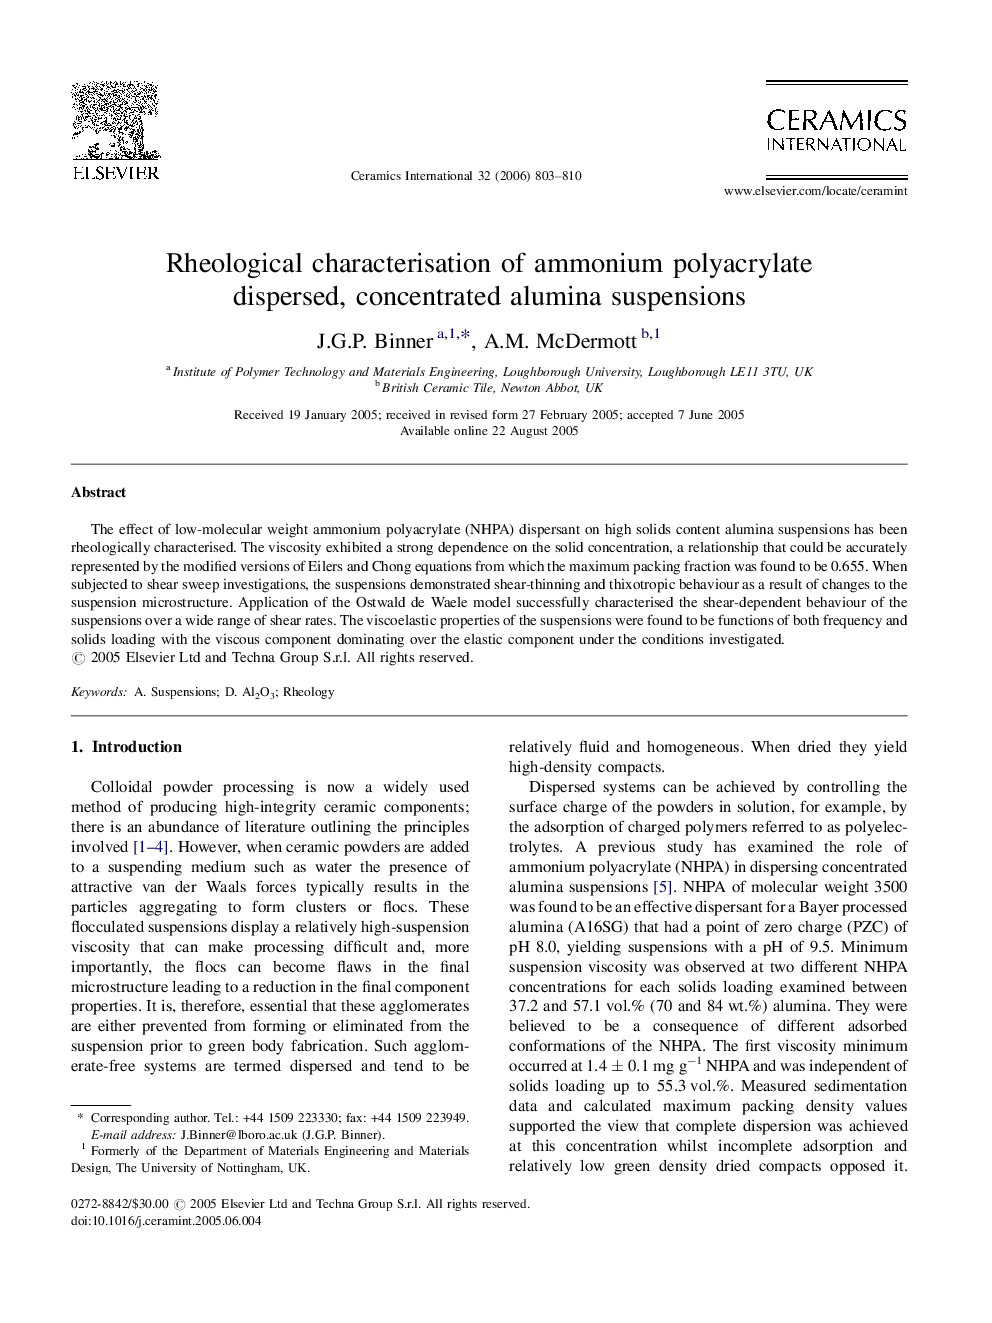 Rheological characterisation of ammonium polyacrylate dispersed, concentrated alumina suspensions